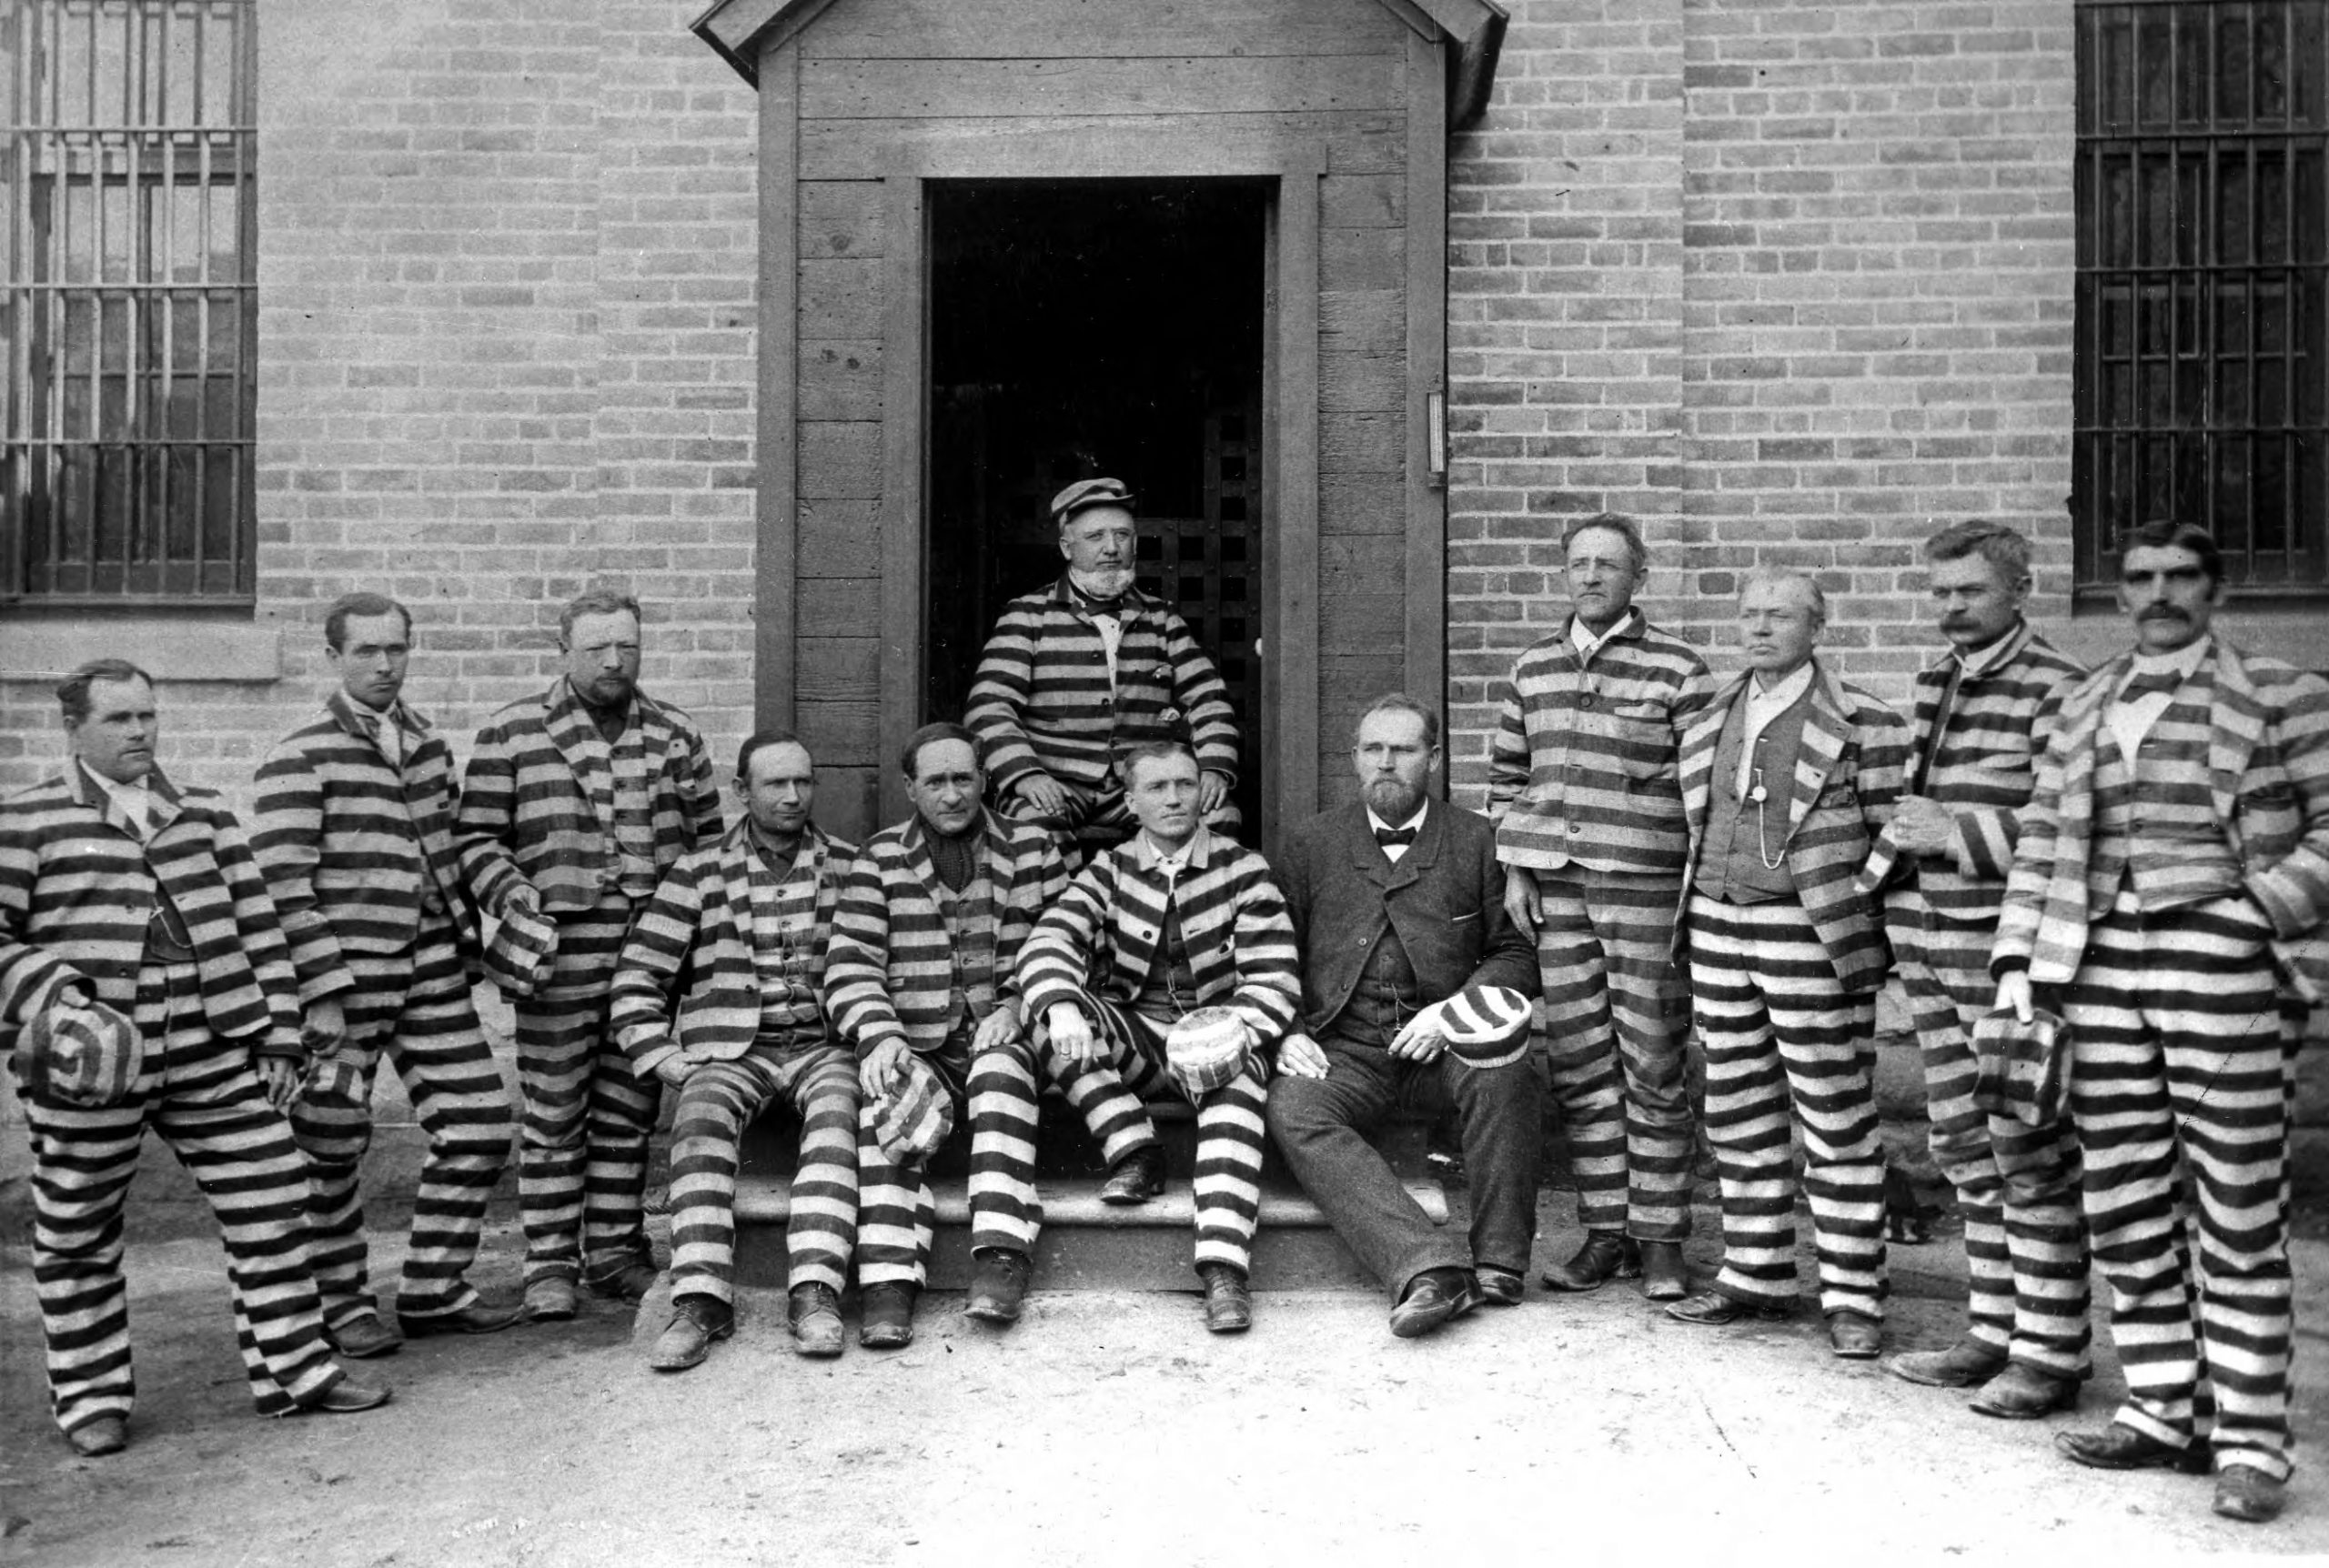 Under the Edmunds Act of 1888 many church leaders and members were arrested for “unlawful cohabitation” for practicing polygamy and sentenced to prison terms at the Utah Penitentiary, pictured here.